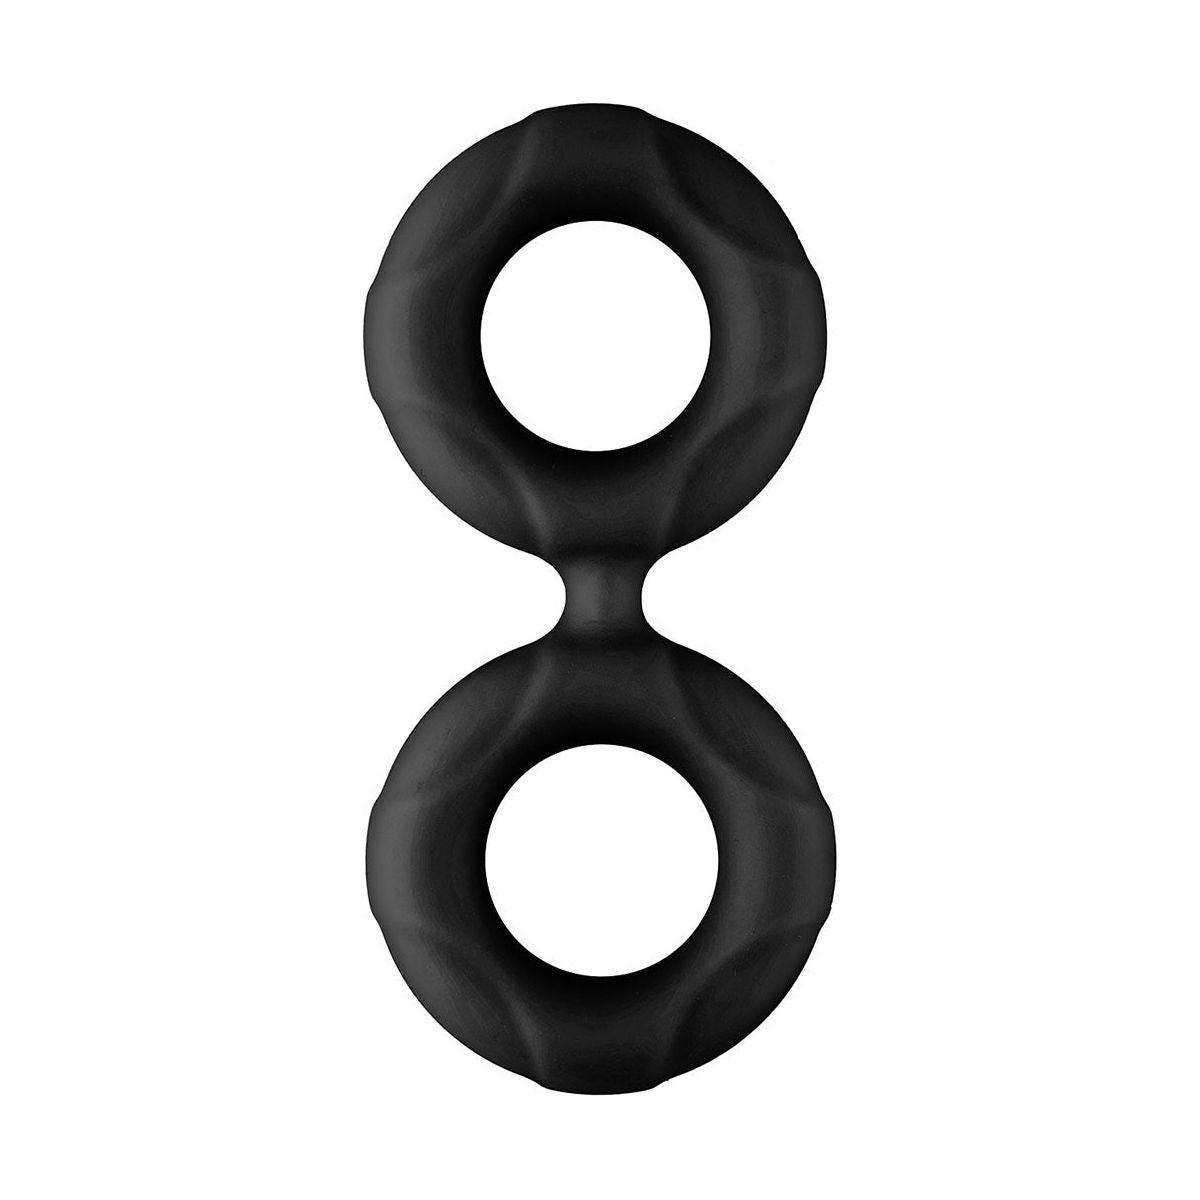 FORTO F-81 44mm Double Ring - Black - shop enby